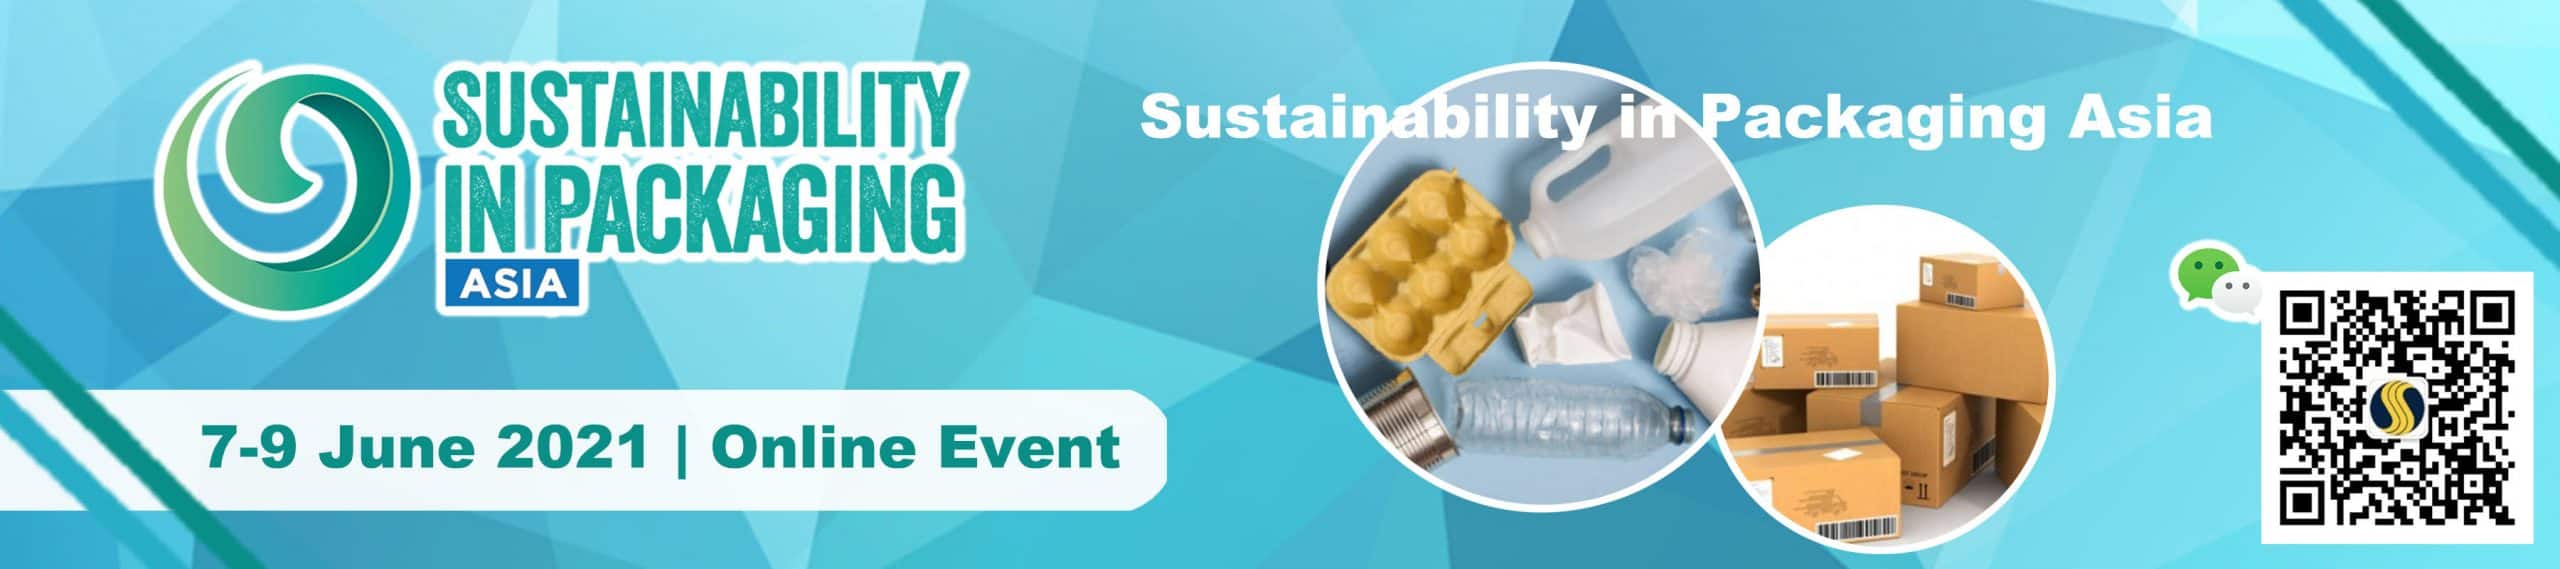 Sustainability in Packaging Asia 2021